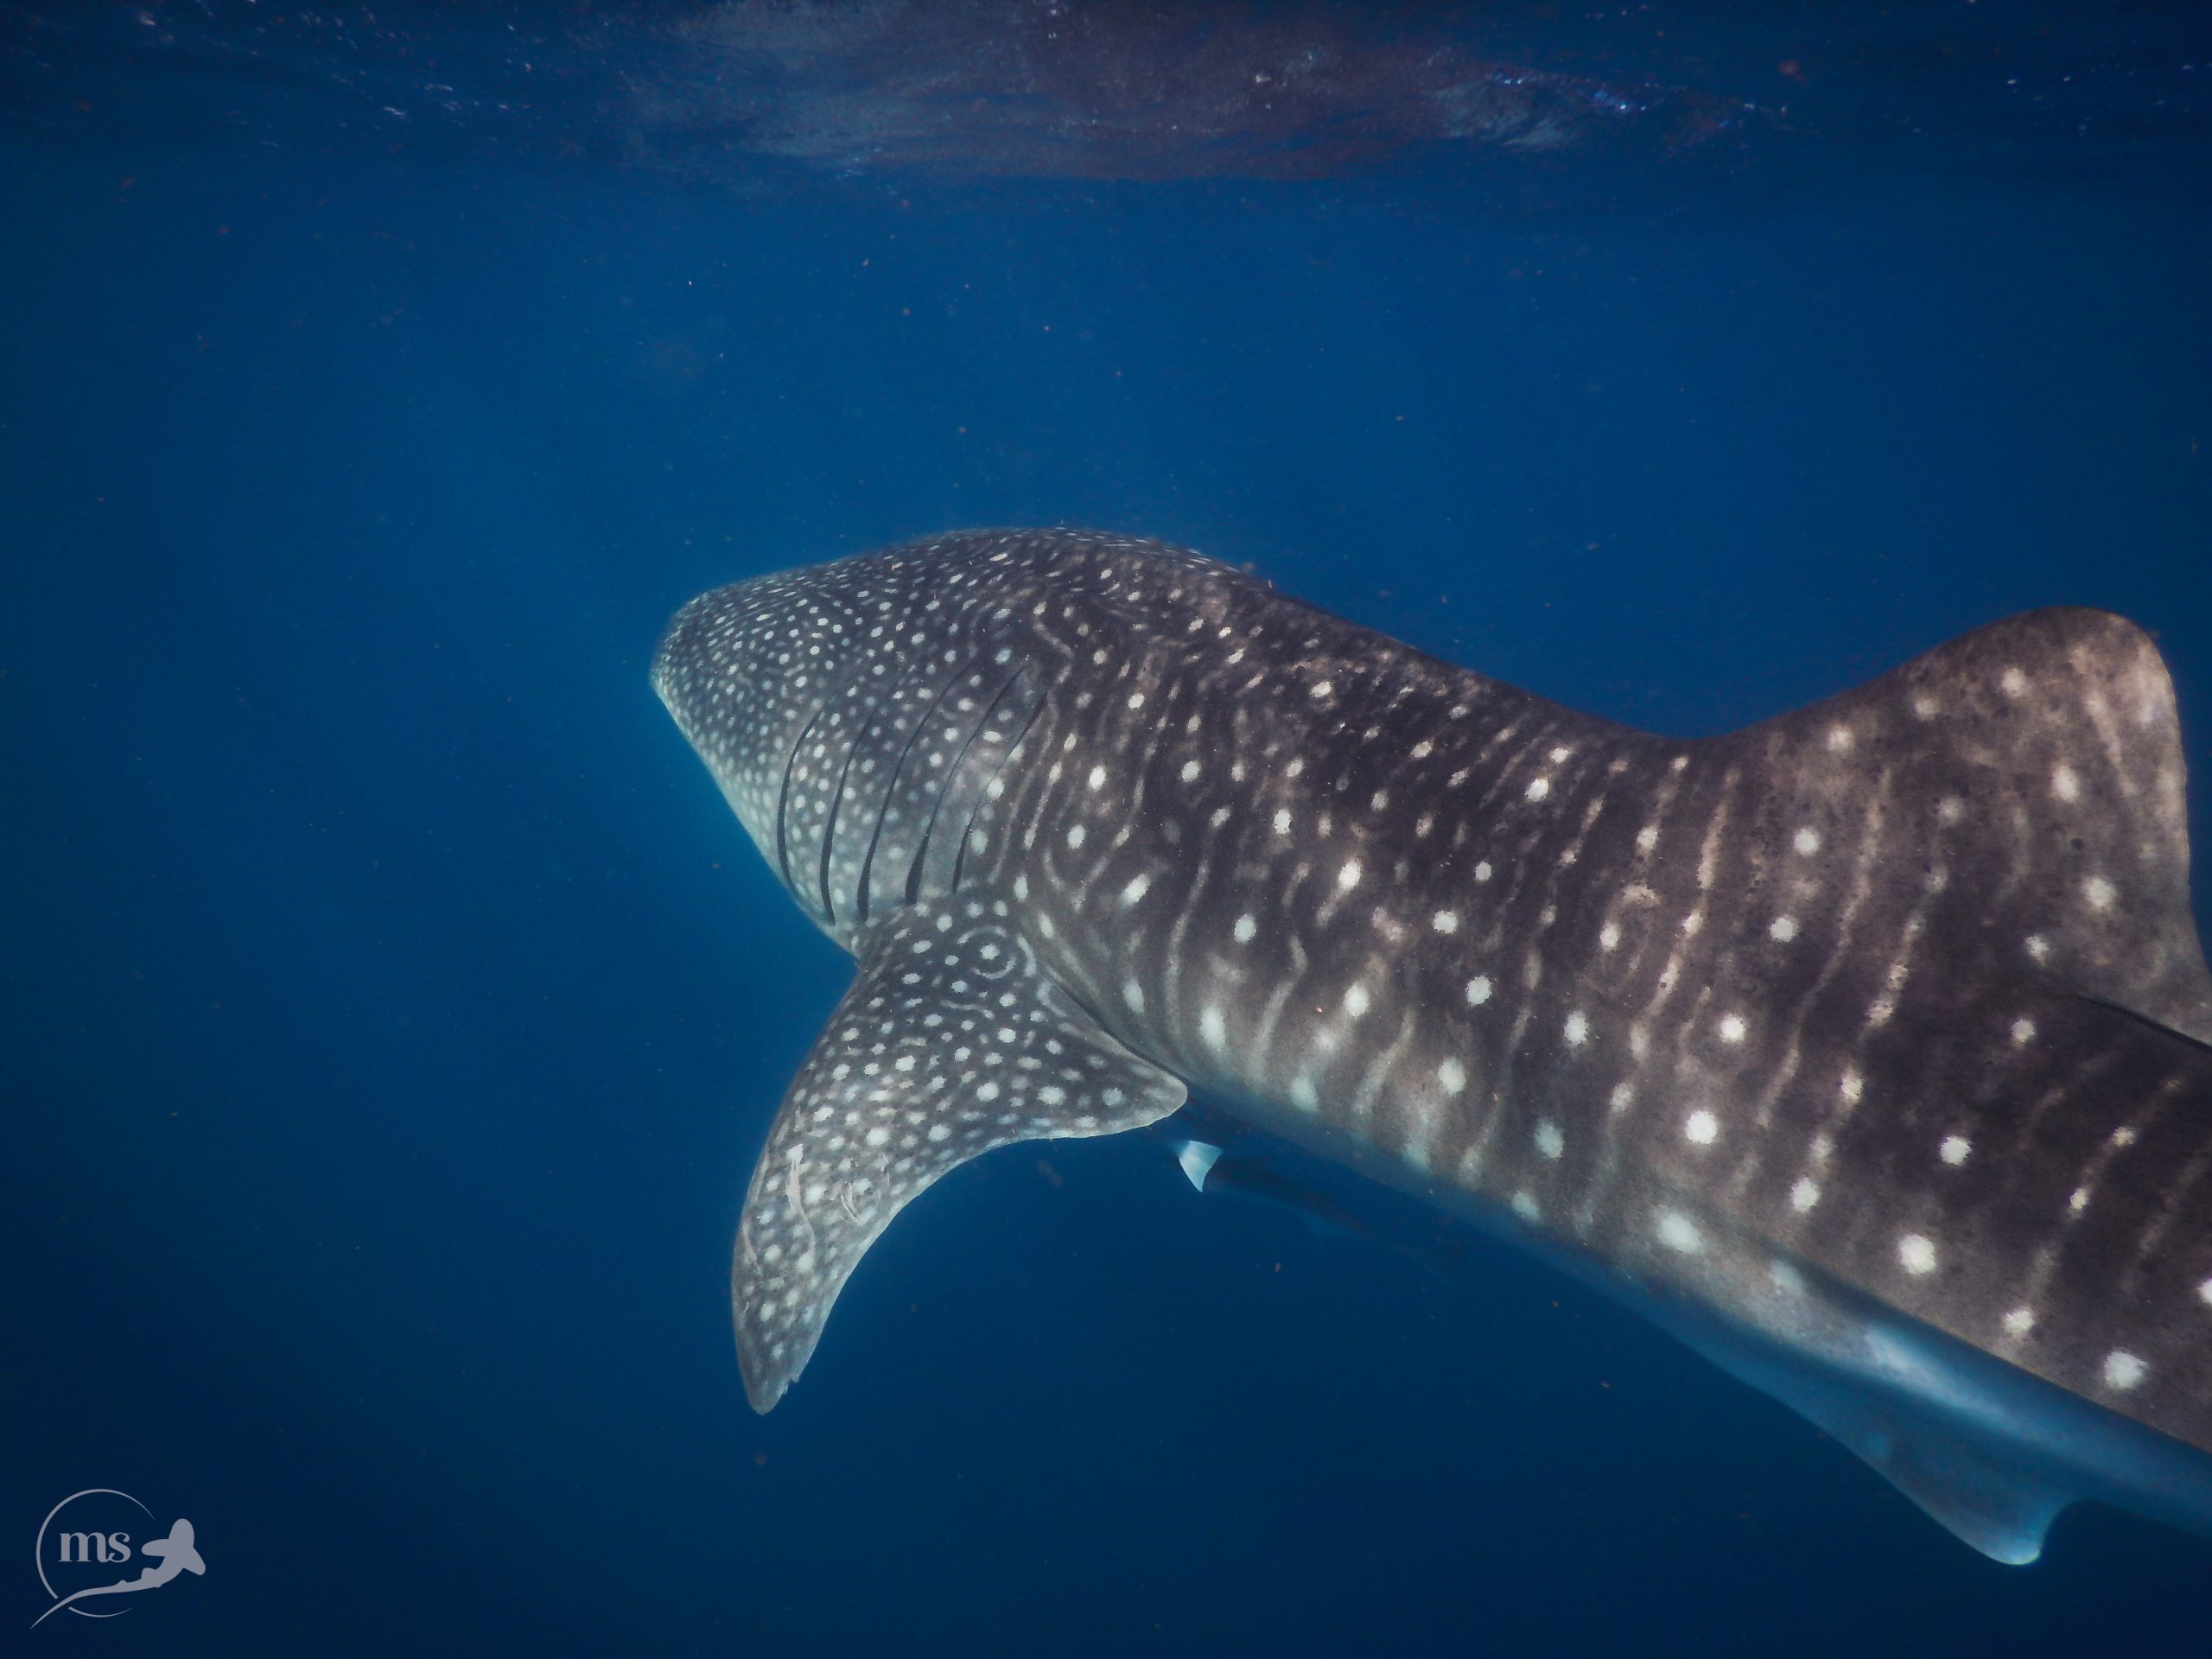 Whale shark, one of the most iconic sharks in the Baja California Peninsula